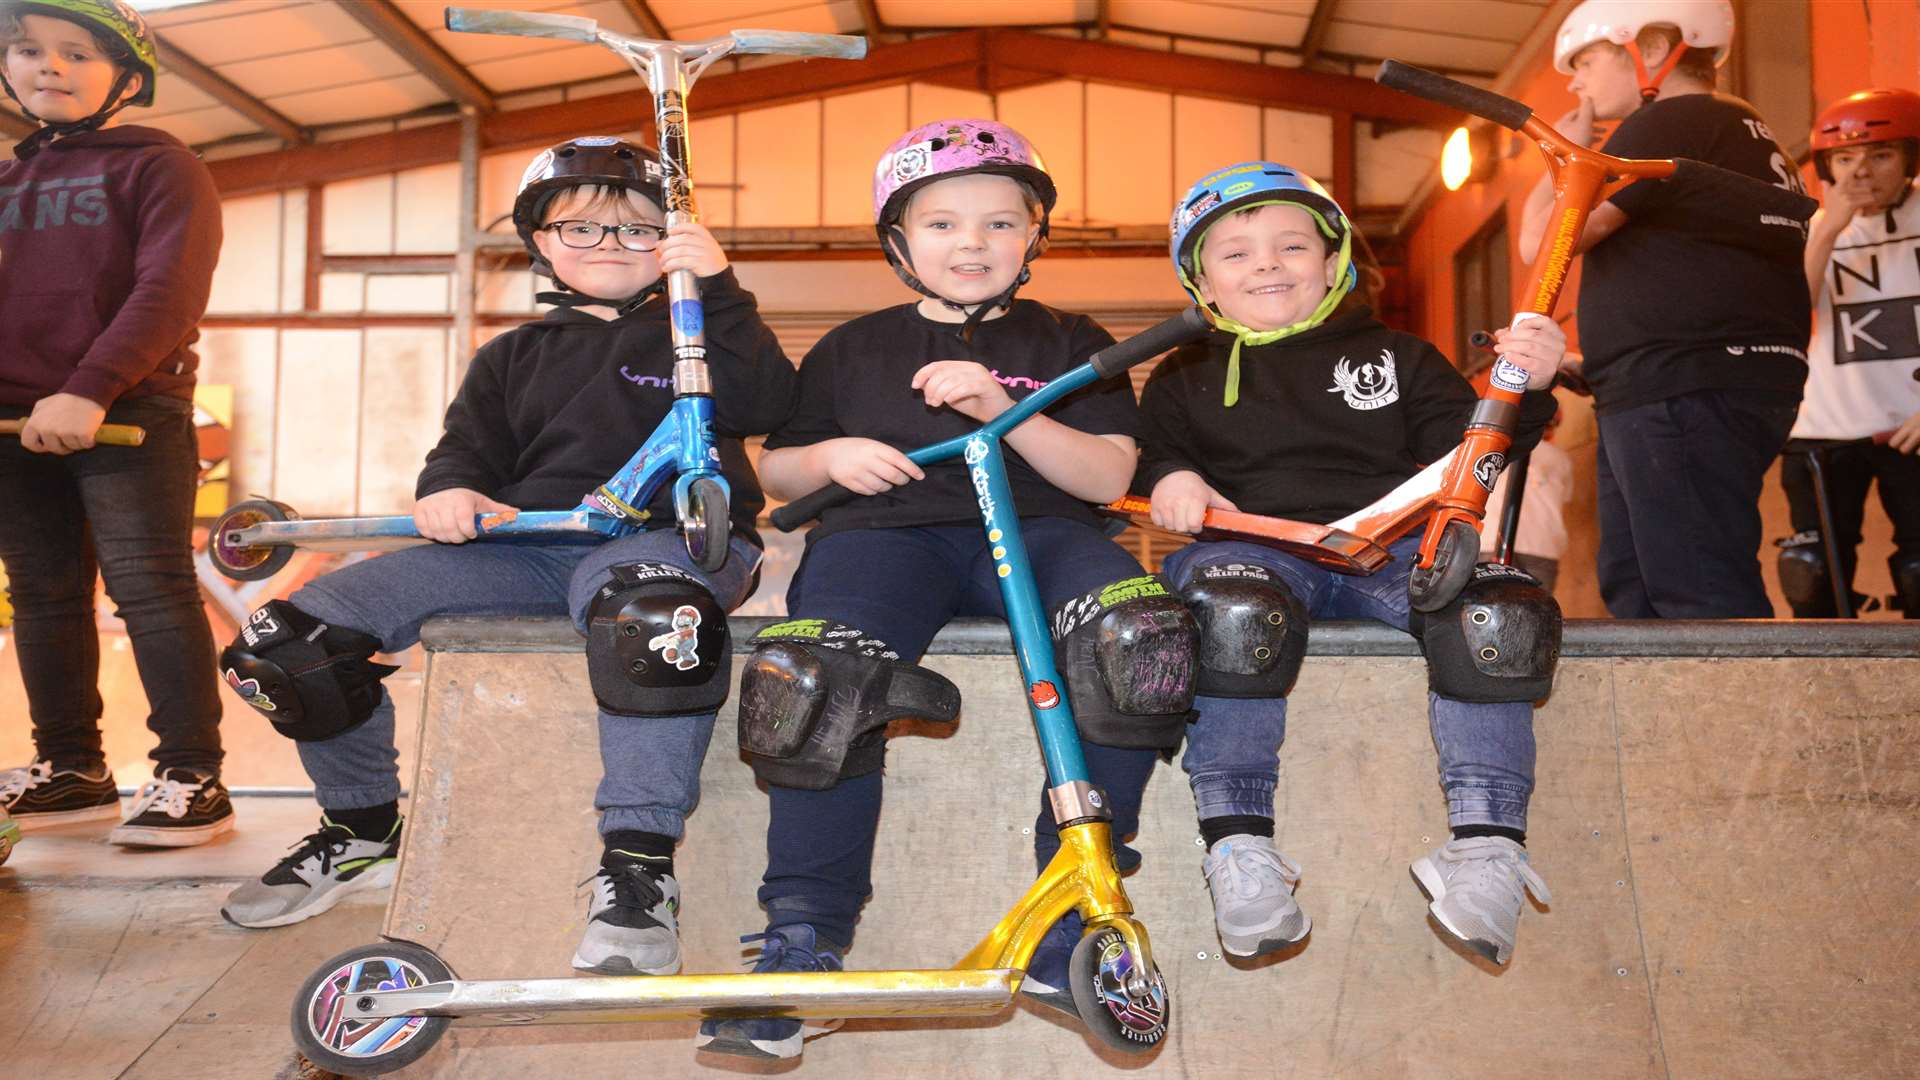 Unit 1 Skatepark in Rochester is the Medway Messenger's charity of the year and a beneficiary of the KM Big Charity Quiz on March 9.